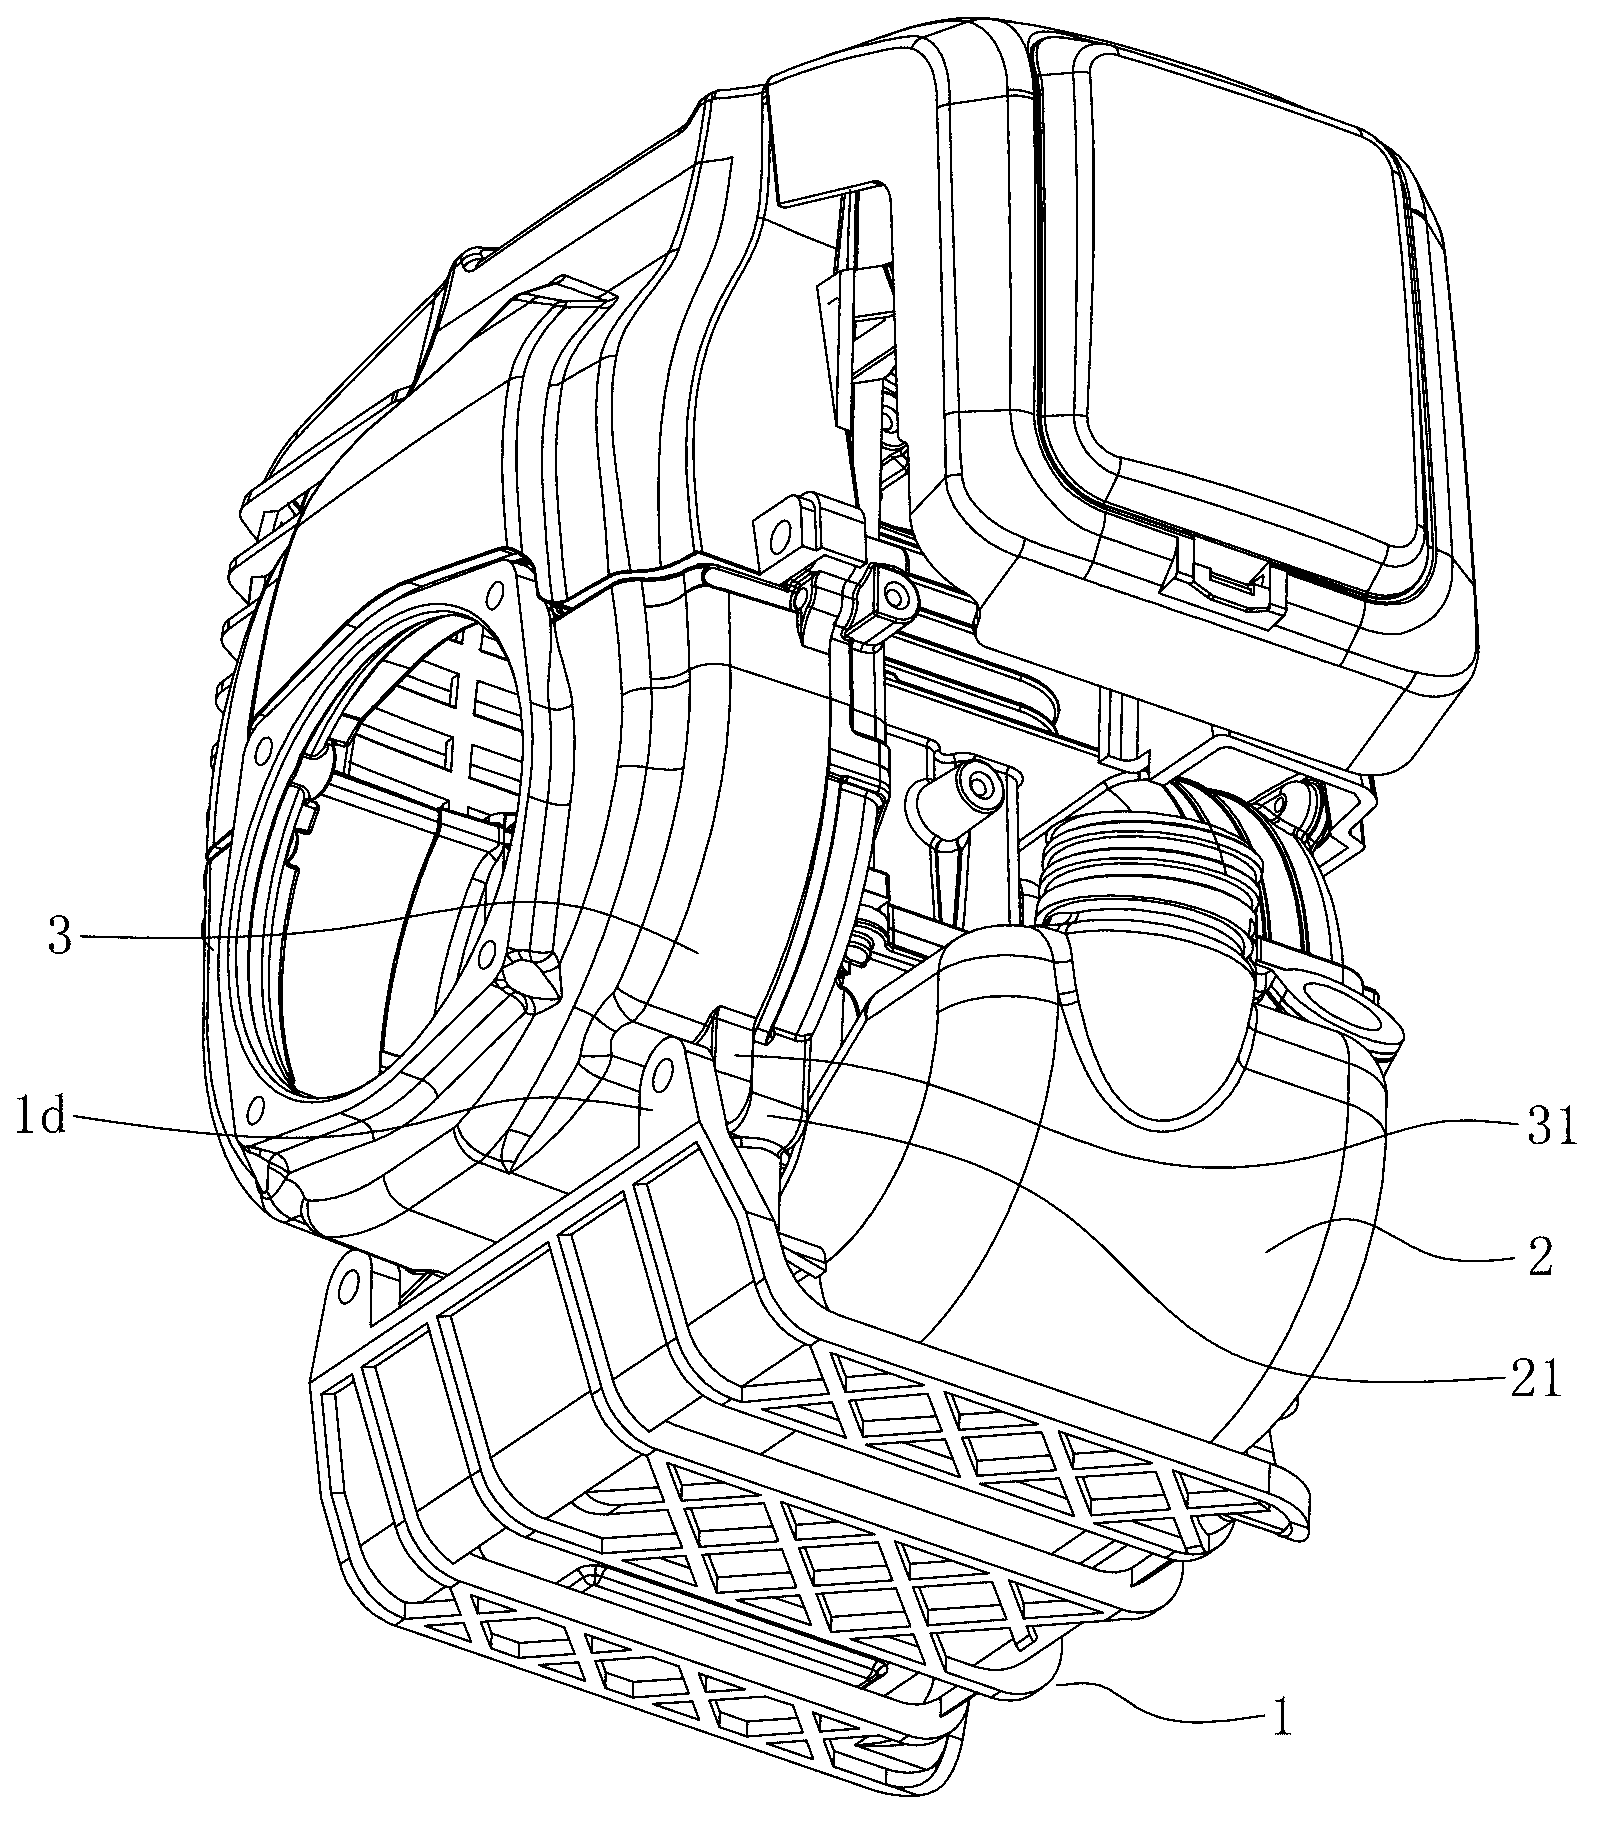 Gasoline engine base with underneath-type oil tank